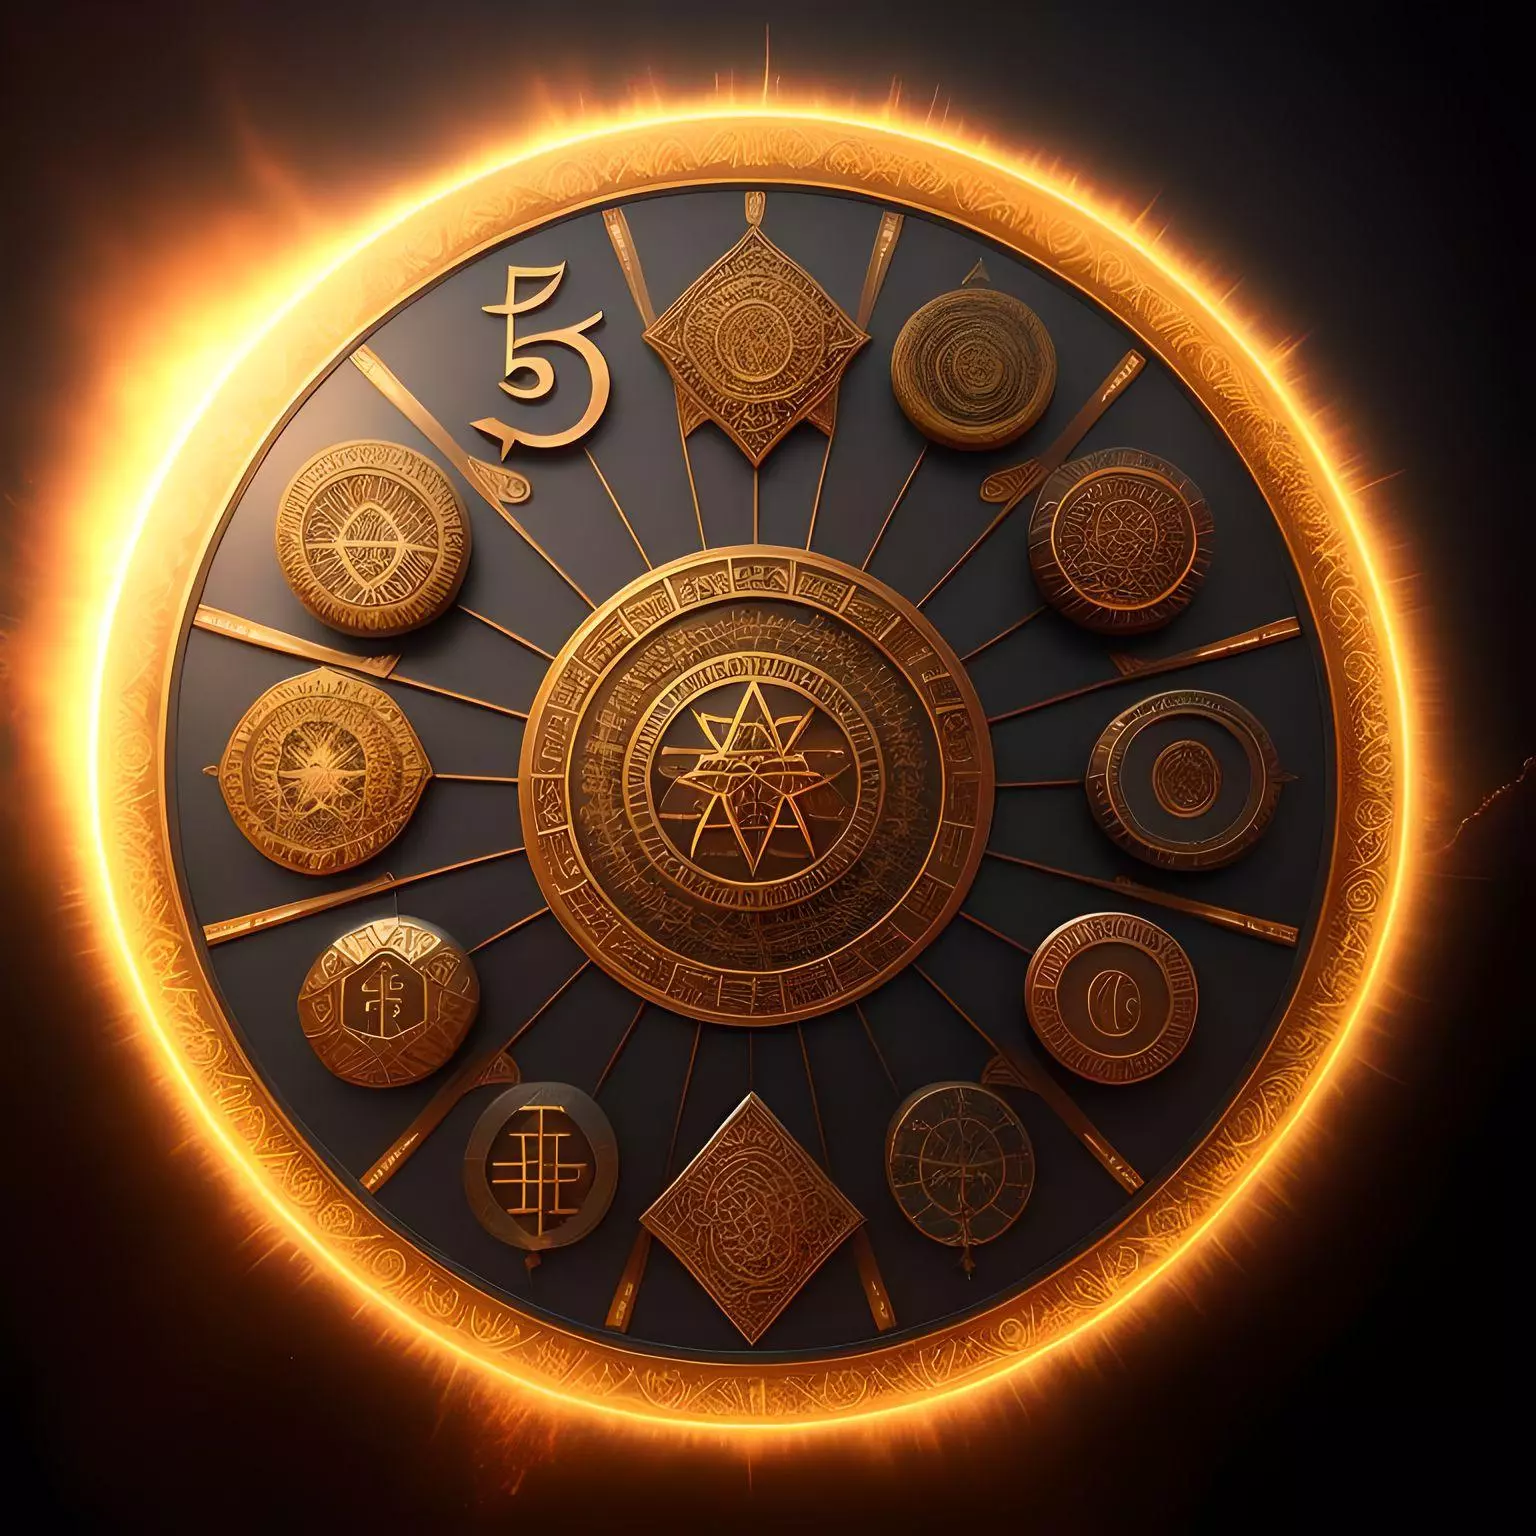 an stone tablet displaying the numerology 5 in a circular format.